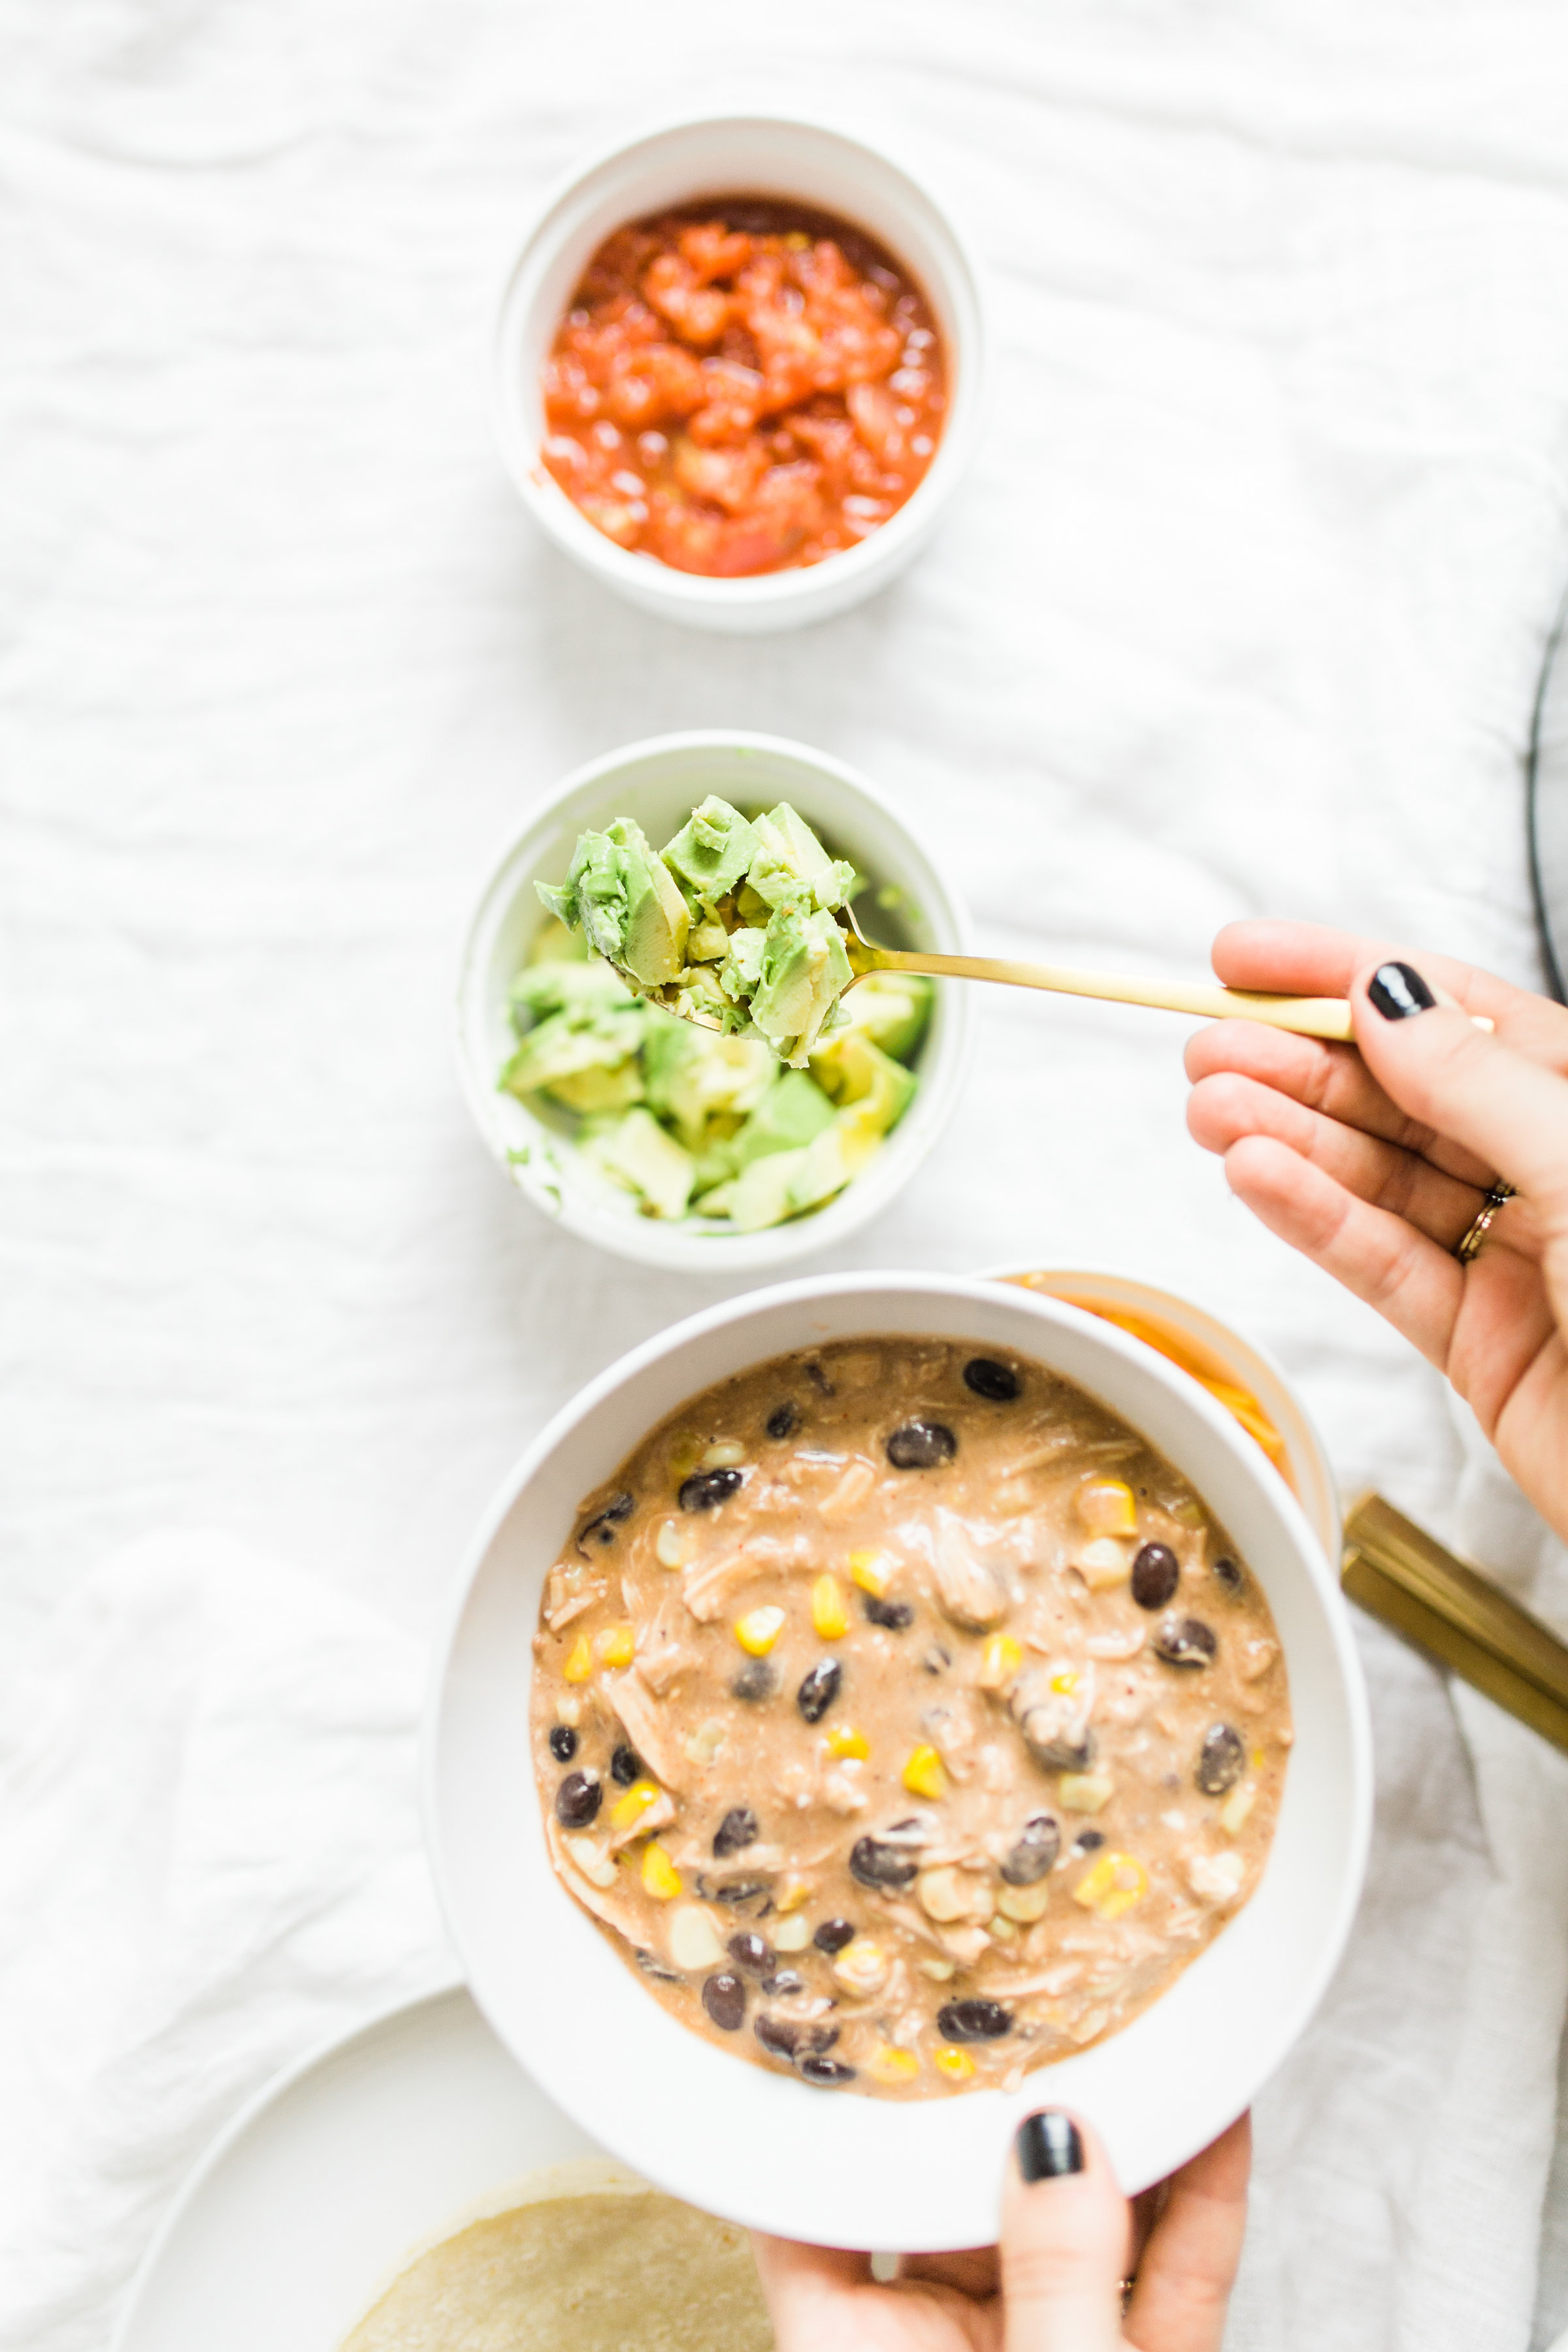 This easy and delicious creamy chicken enchilada soup is made in a crockpot or Instant Pot - a.k.a., dump it and forget it. Our whole family loves it. #crockpot #crockpotmeals #crockpotdinner #instantpot #instantpotdinner #instantpotchicken #crockpotchicken #chickenenchiladas #crockpotenchiladas #instantpotenchiladas #slowcooker #slowcookersoup #slowcookerenchiladas #slowcookermeals Click through for the recipe. | glitterinc.com | @glitterinc